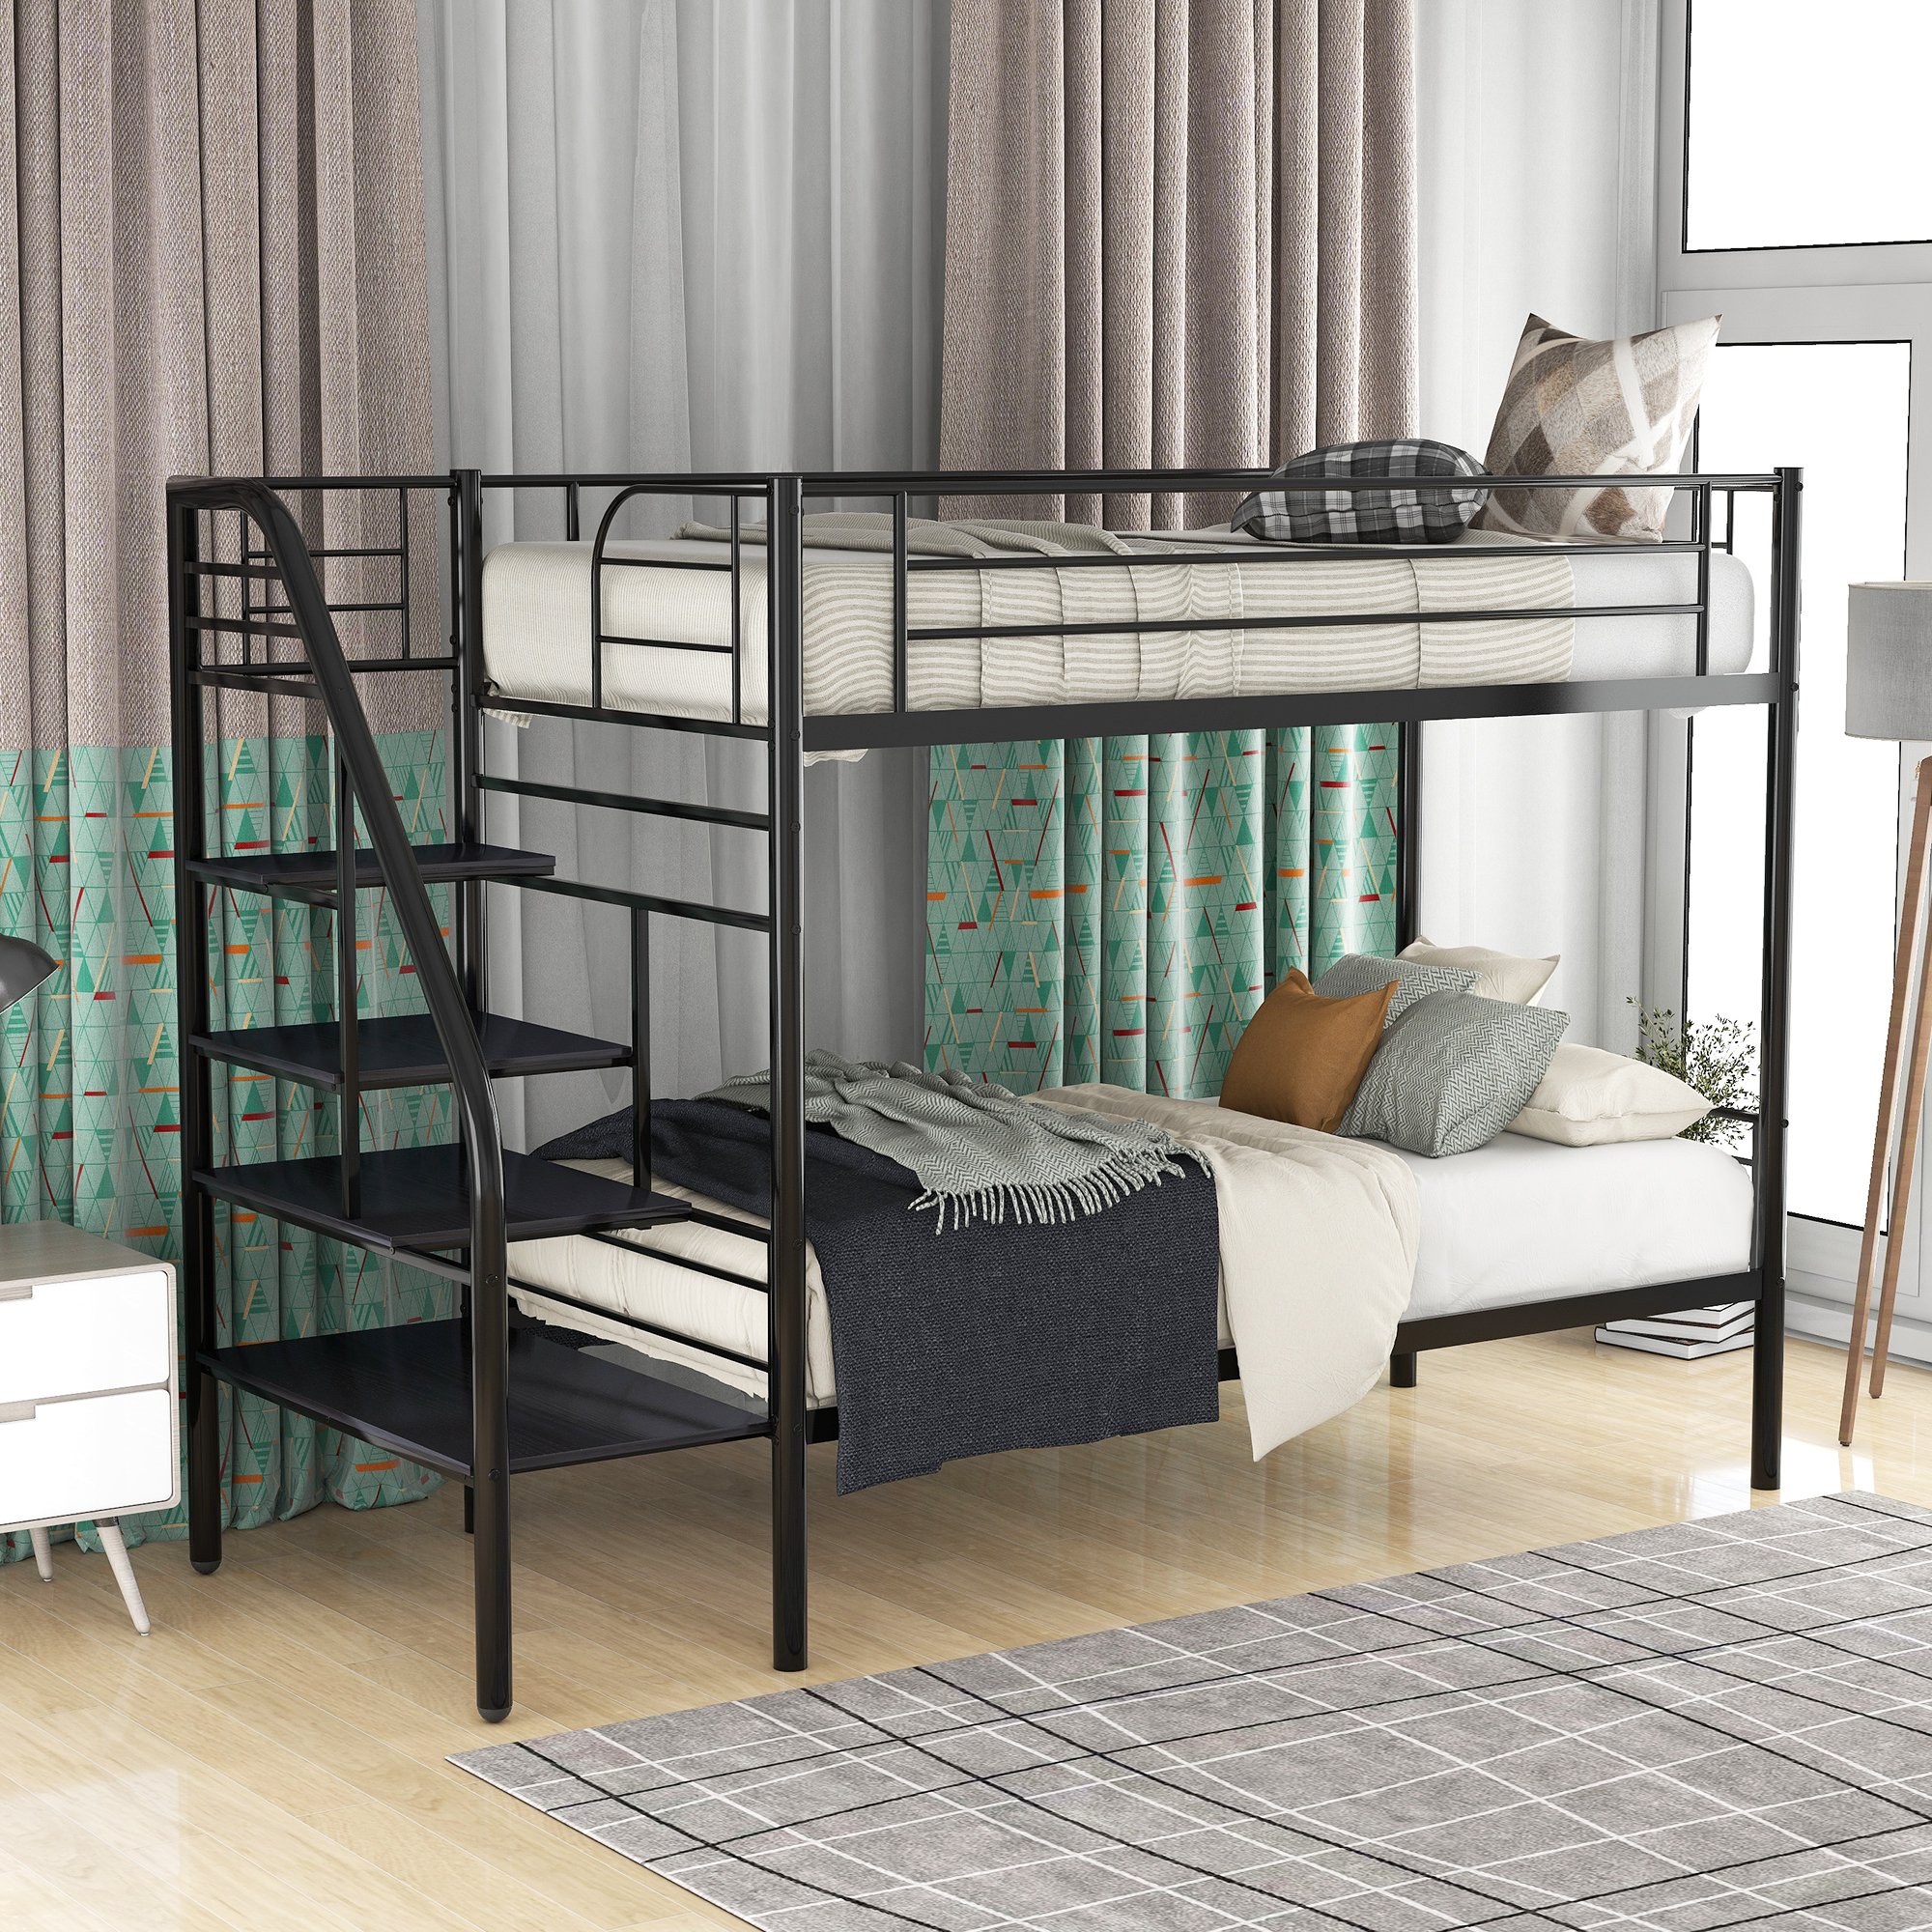 Twin Bunk Bed With Metal Frame And Ladder - Cool Toddler Beds